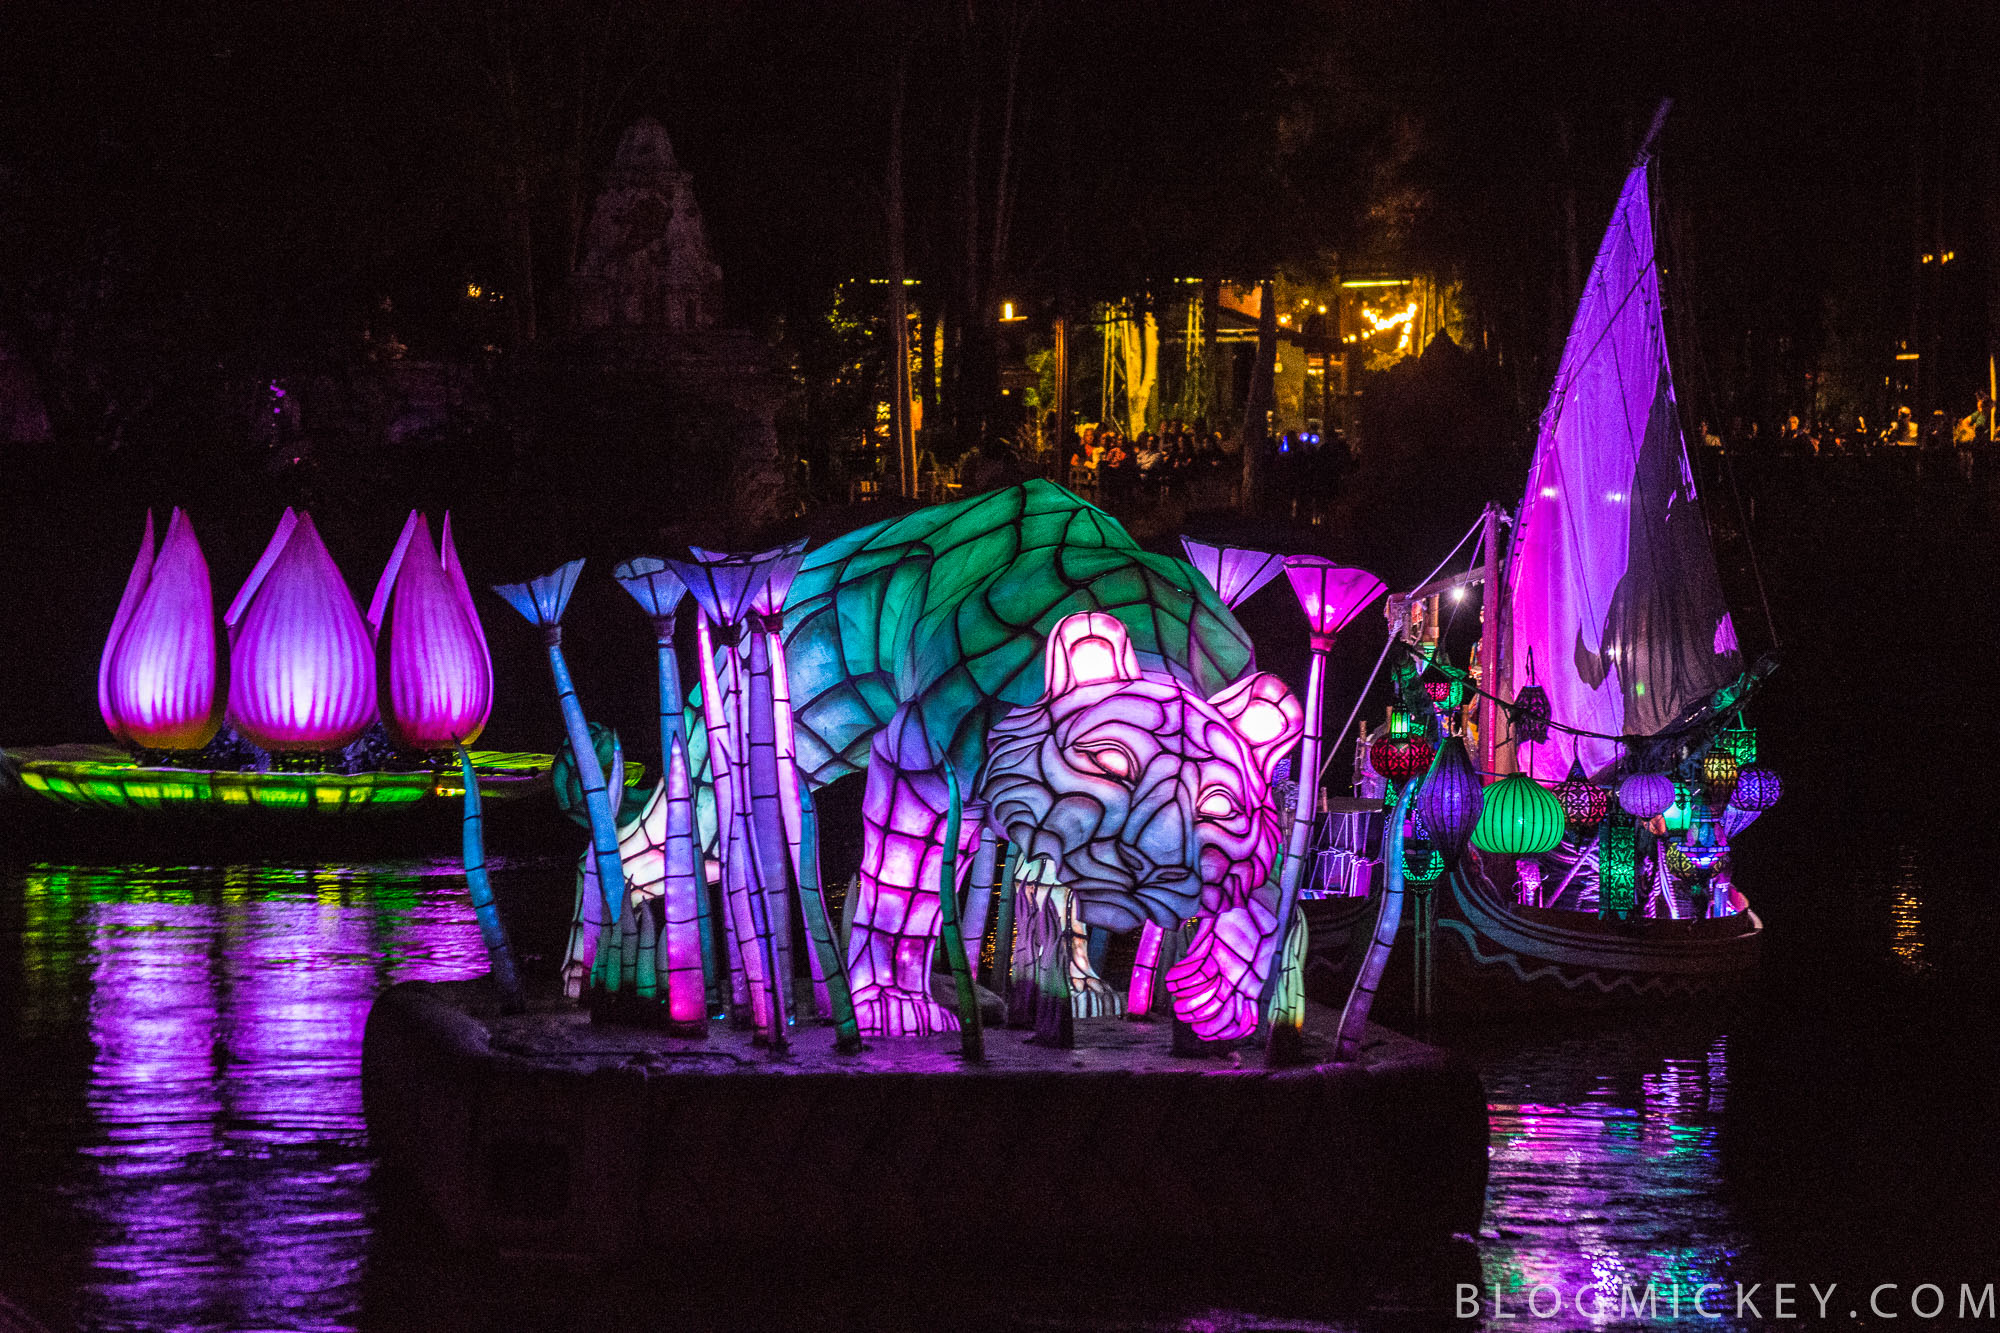 Rivers of Light Animal Floats Gutted, Removed from Disney's Animal Kingdom